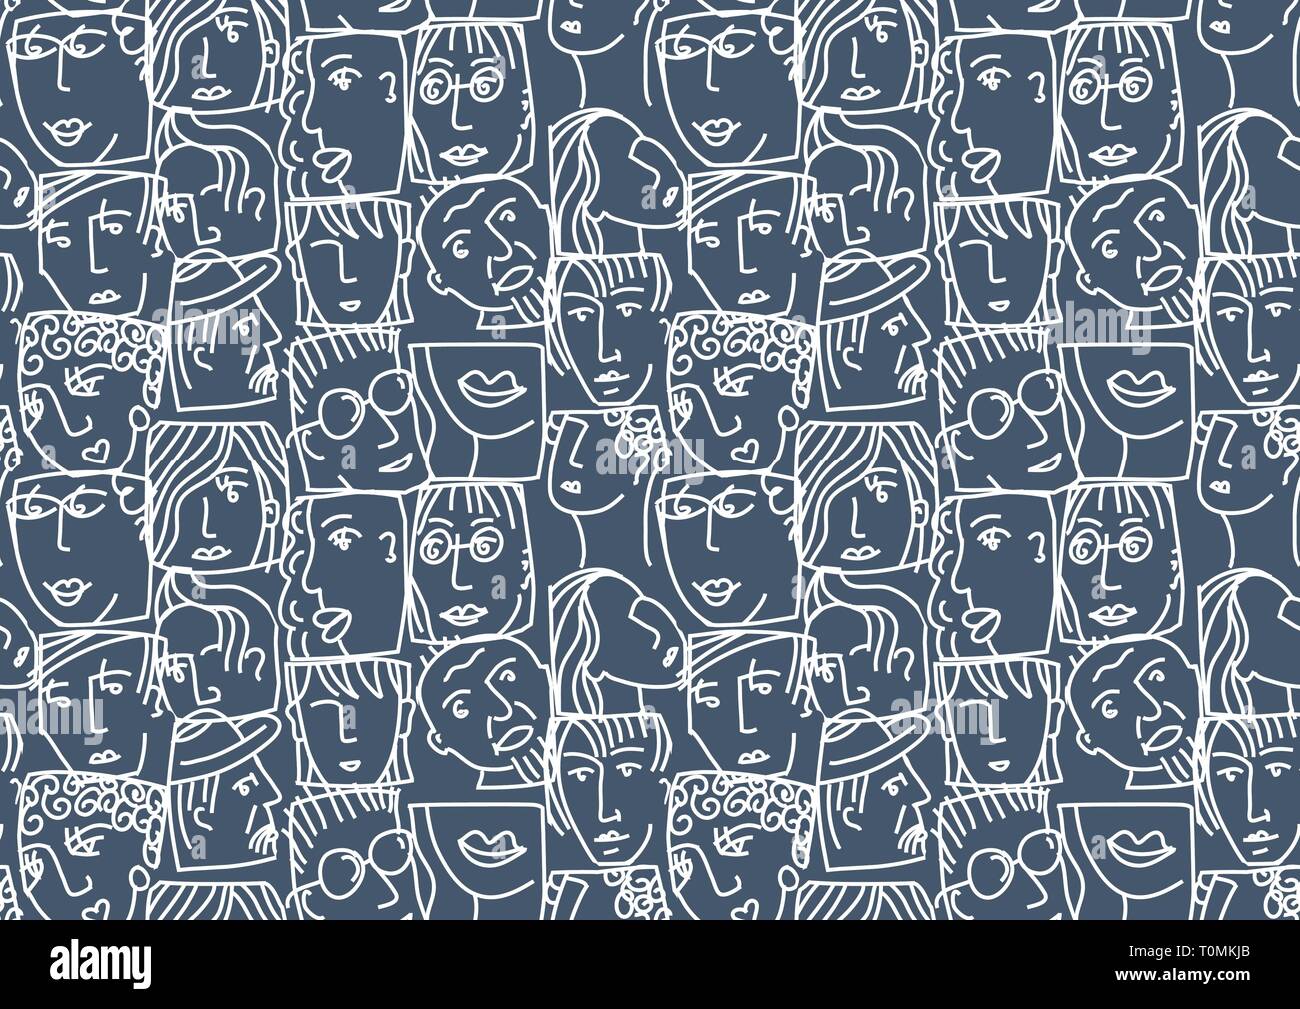 People abstract faces avatars characters invert seamless pattern Stock Vector